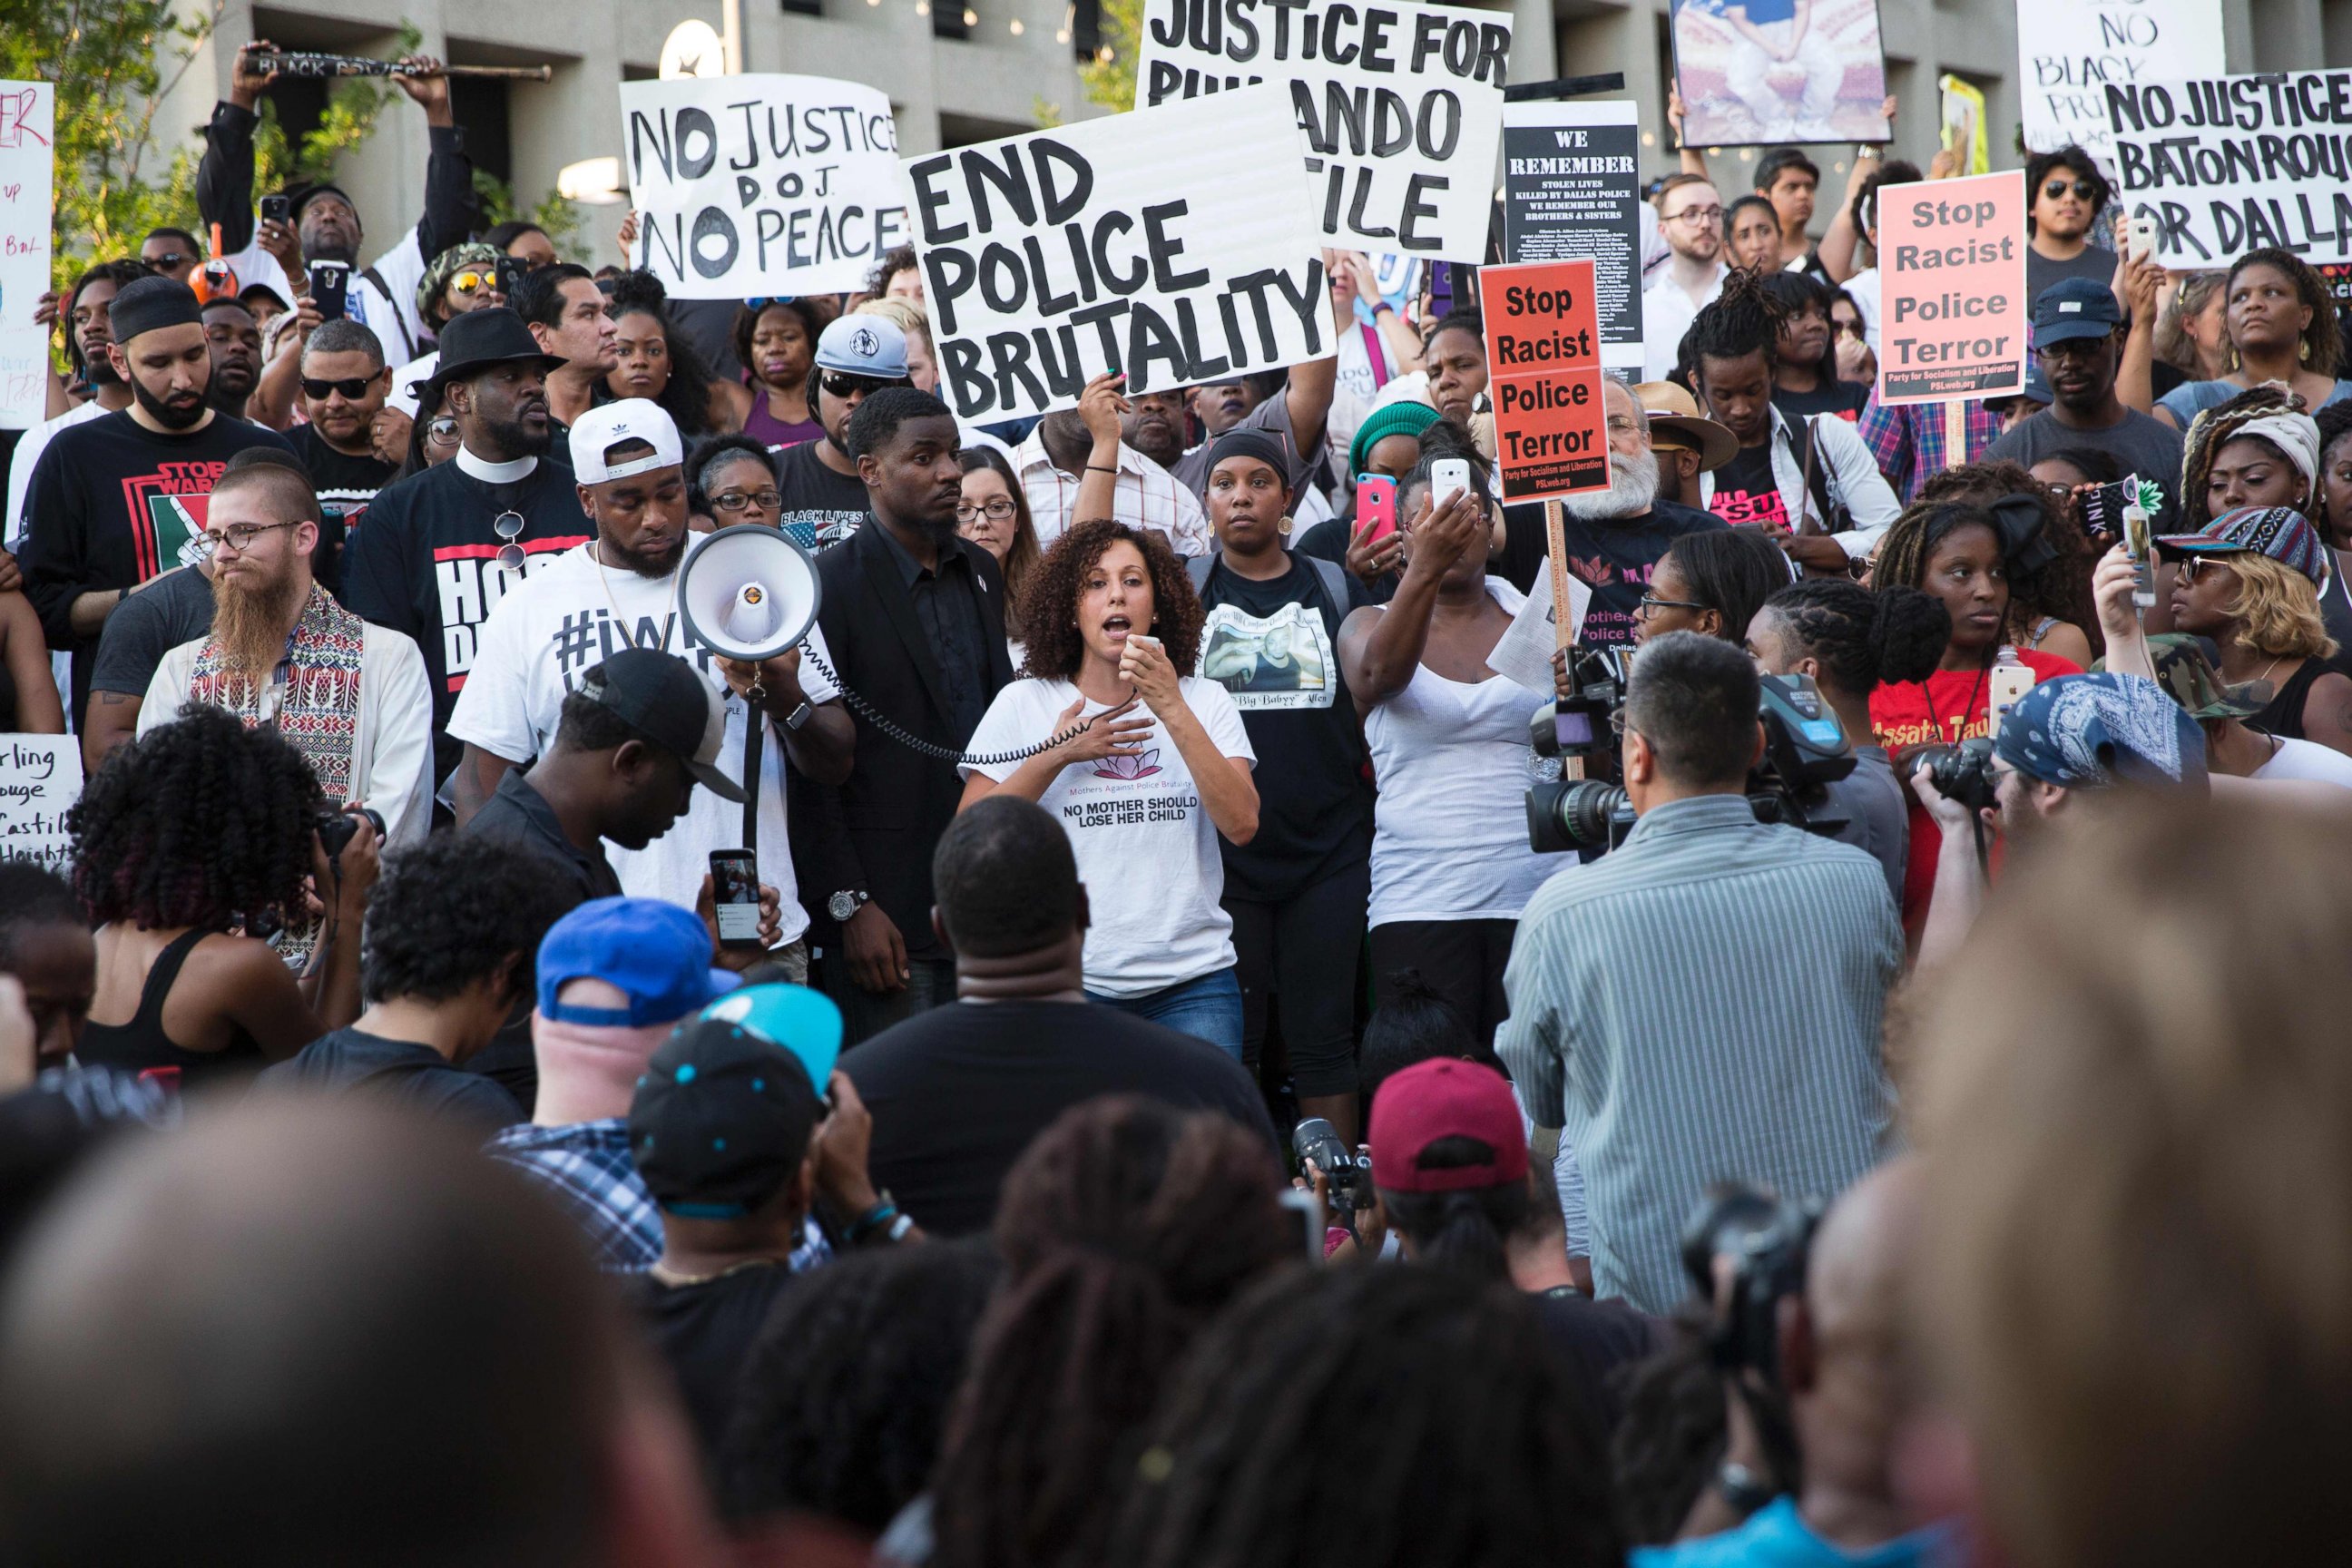 PHOTO: People rally in Dallas, Texas, July 7, 2016 to protest the deaths of Alton Sterling and Philando Castile. This was before the shooting incident happened that killed five Dallas Police officers.